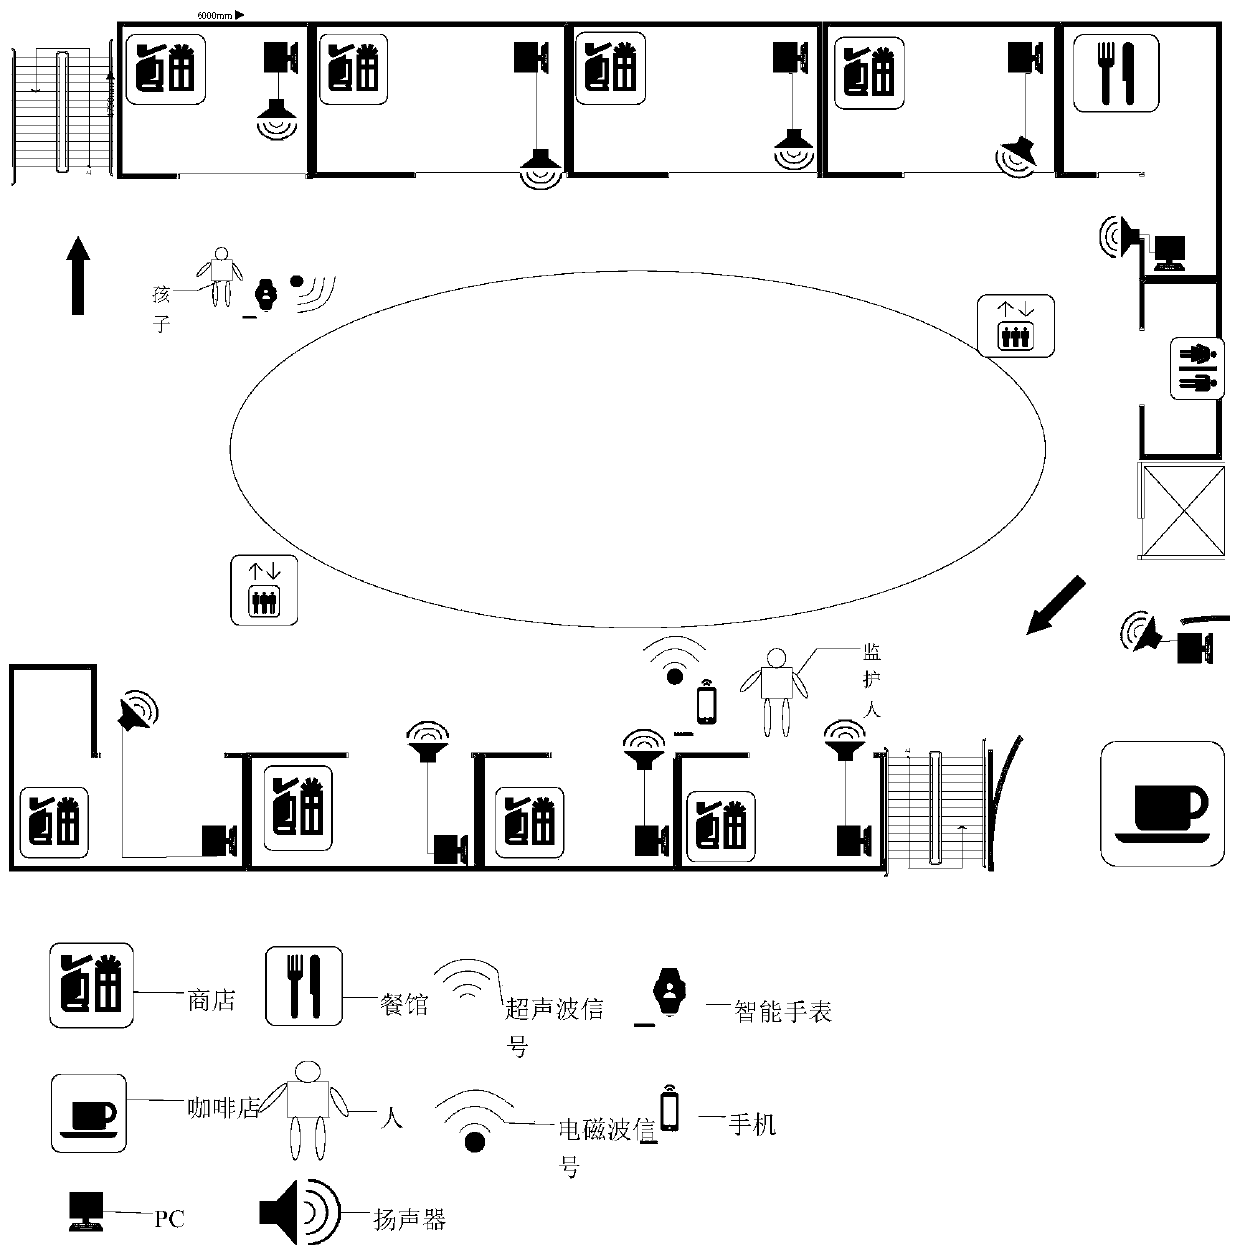 Asynchronous indoor positioning method based on intelligent terminal and ultrasonic communication